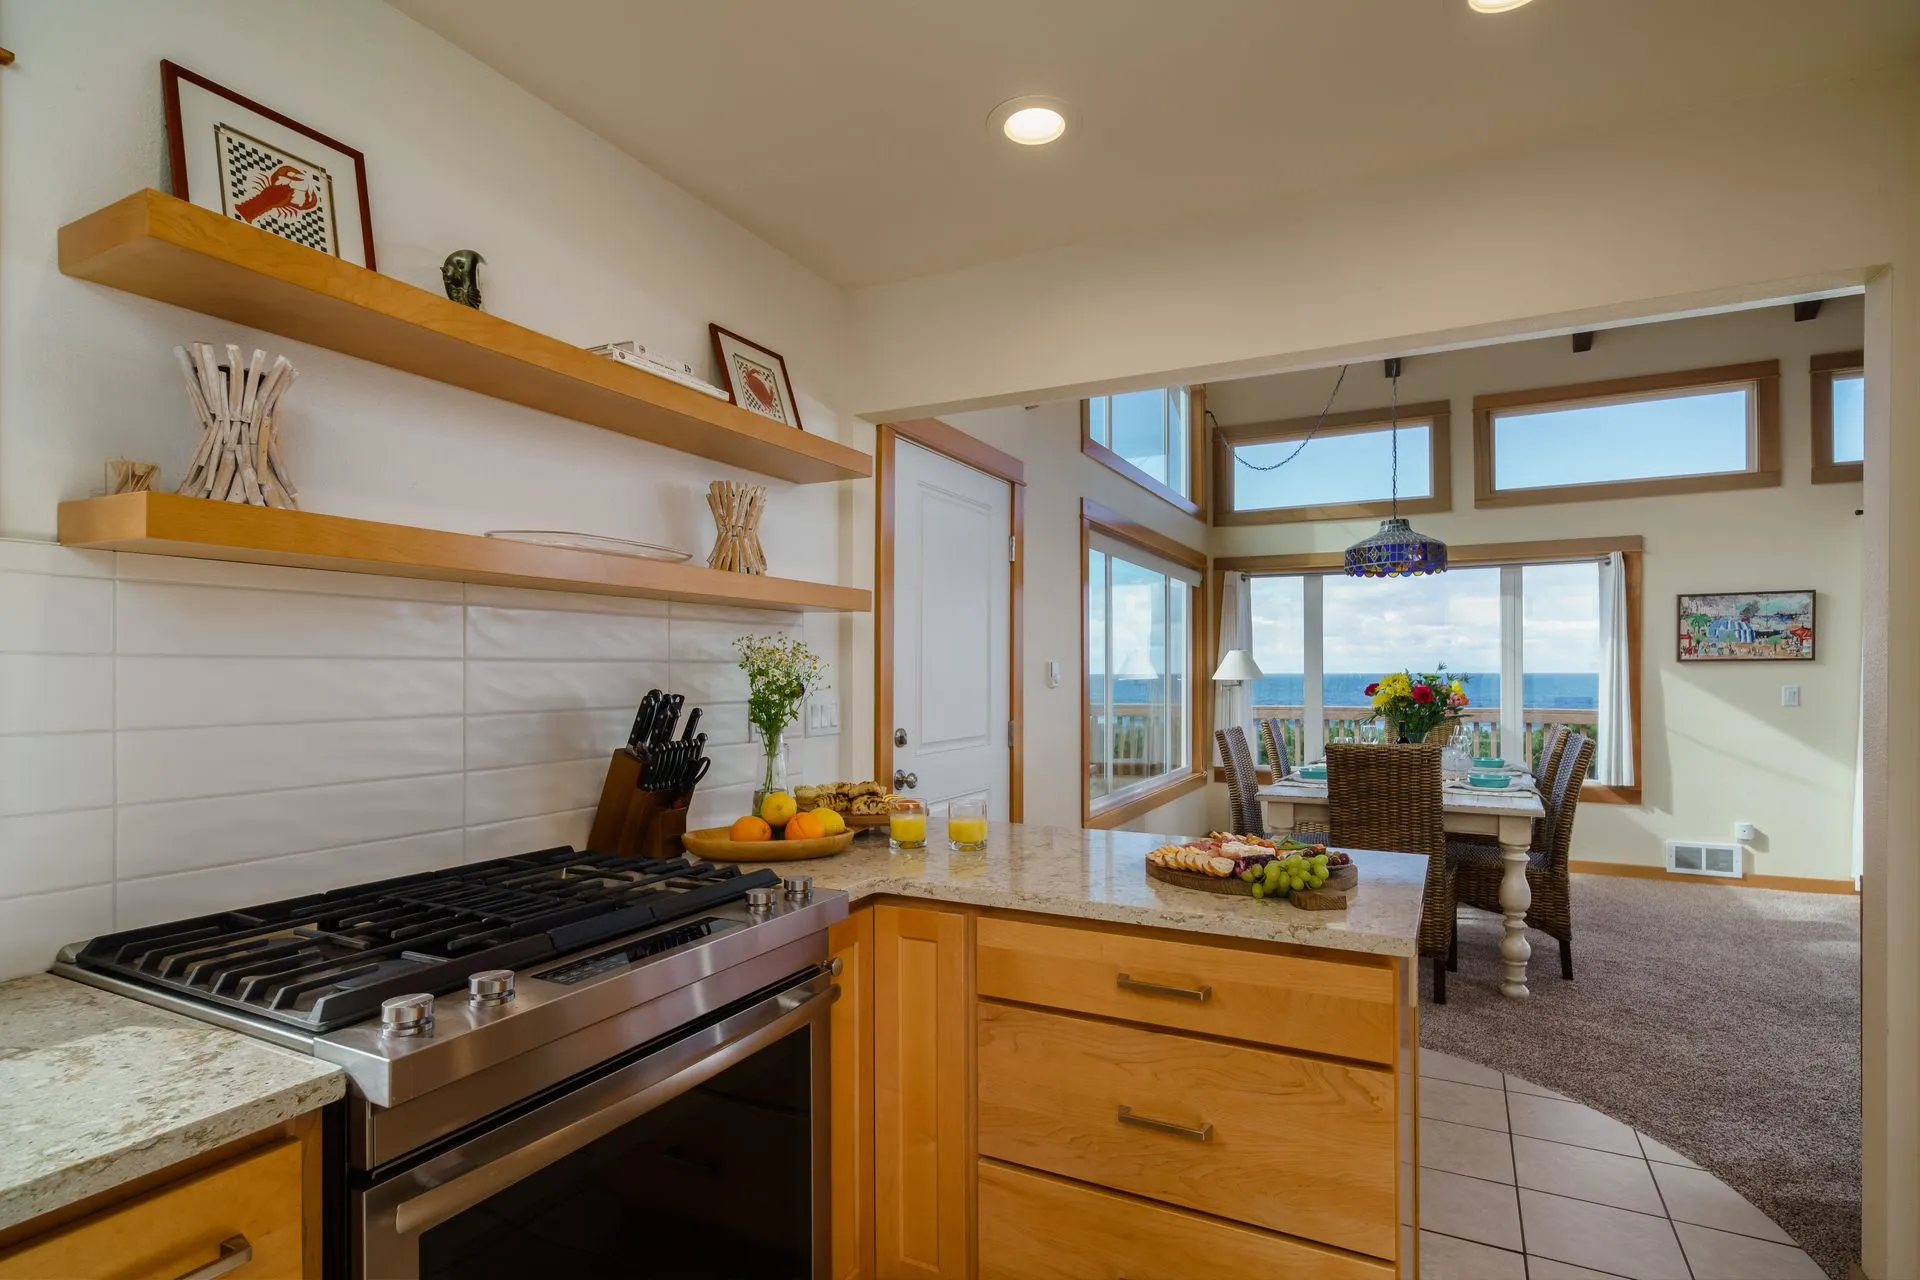 Vacation Rental in Cannon Beach, Pacific House kitchen with a stove and view of dining room